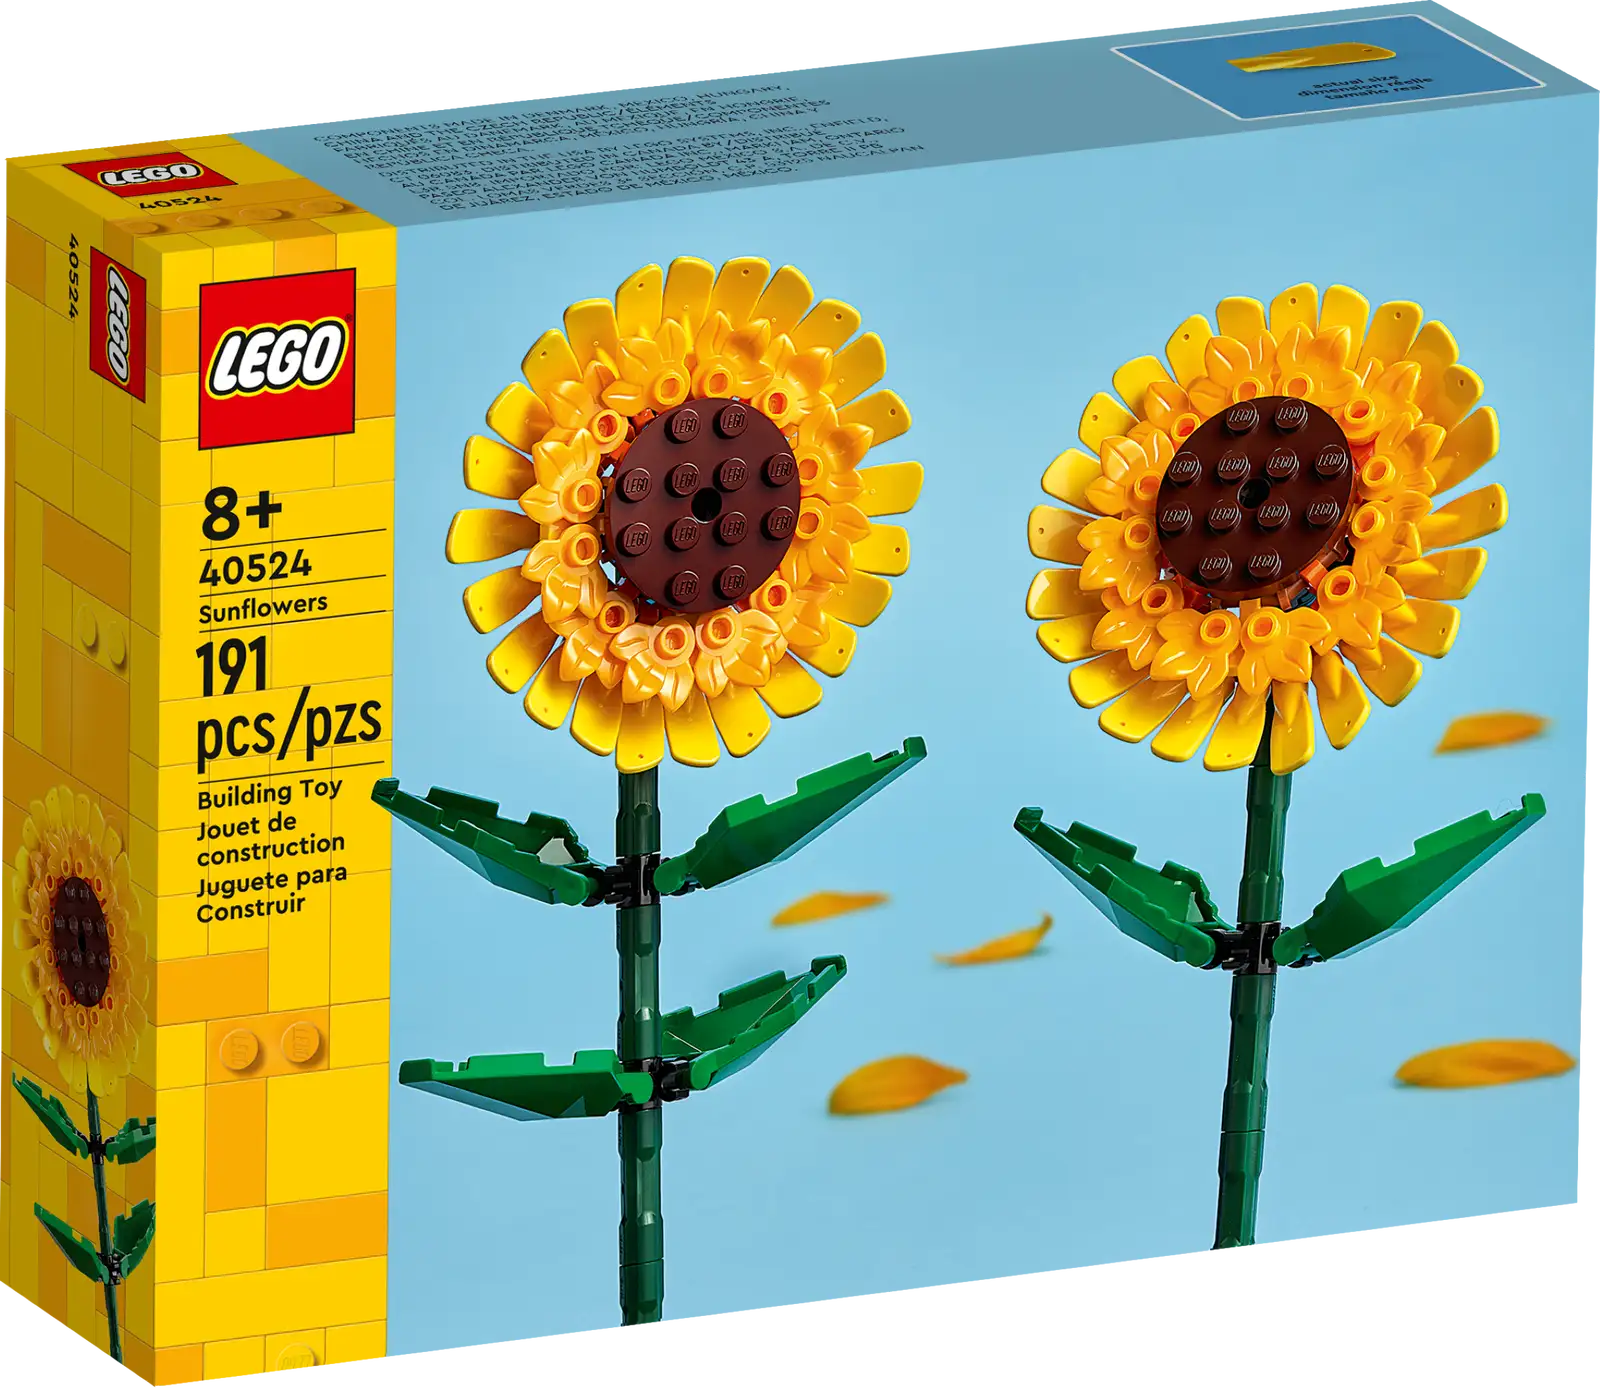 Sunflowers bring instant cheer and optimism to their surroundings. And now you can build your own model version of this much-loved flower with the vibrant LEGO® Sunflowers (40524) building kit. Create an eye-catching sunflower display or make a mixed bouquet by adding the LEGO Roses (40460), LEGO Tulips (40461) or LEGO Flower Bouquet (10280) sets (each set sold separately). It also makes a great Mother’s Day gift or anytime treat for a friend or loved one. Build a sunflower display – Create a display piece for any room with the colorful LEGO® Sunflowers (40524) building kit. Includes 2 sunflower blooms with adjustable green stems and leaves Combine with other sets – LEGO® Sunflowers can be displayed on its own or combined with the LEGO Roses (40460), LEGO Tulips (40461) or LEGO Flower Bouquet (10280) sets, each sold separately Dimensions – There are 191 pieces in the set, and the model sunflowers measure over 9.5 in. (25 cm) tall